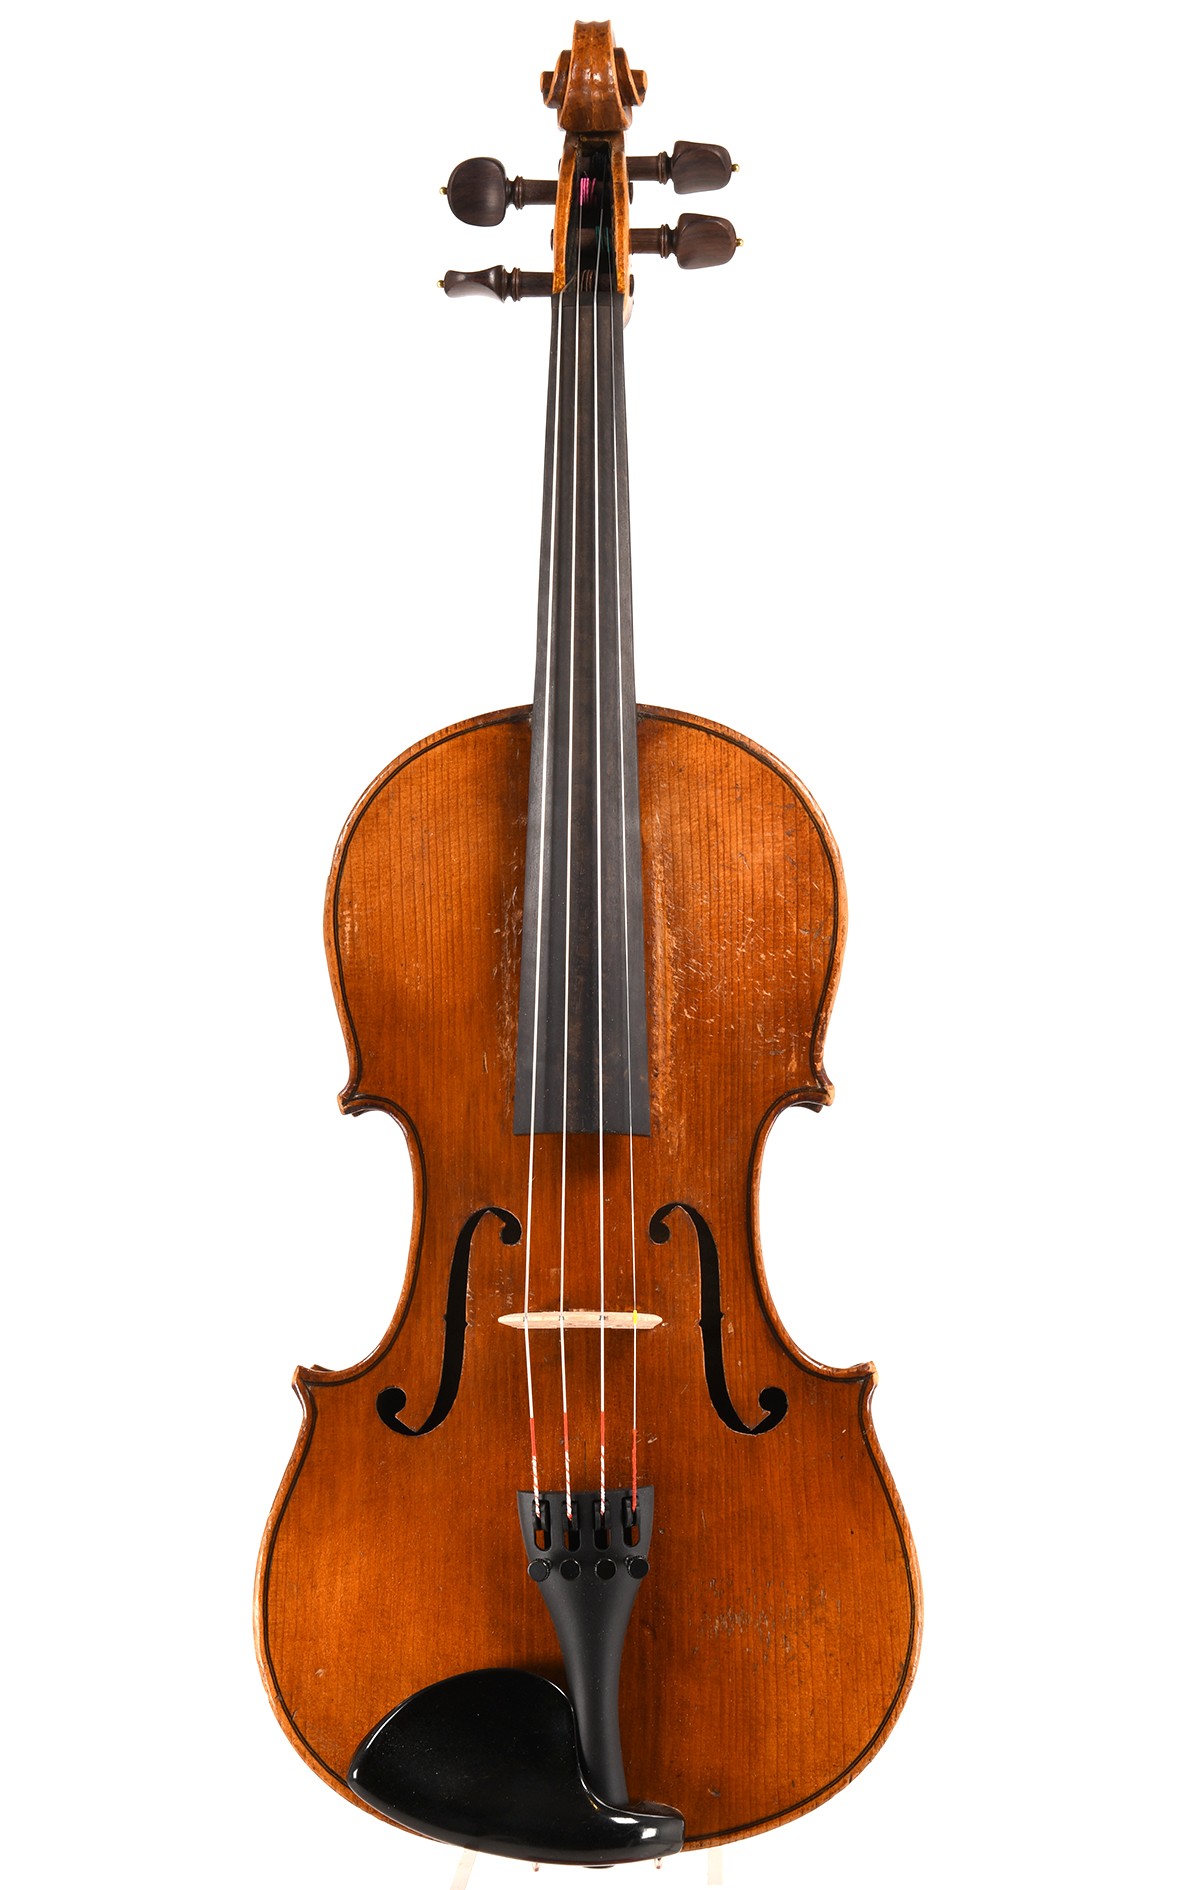 Antique violin from Saxony, Germany 1920's